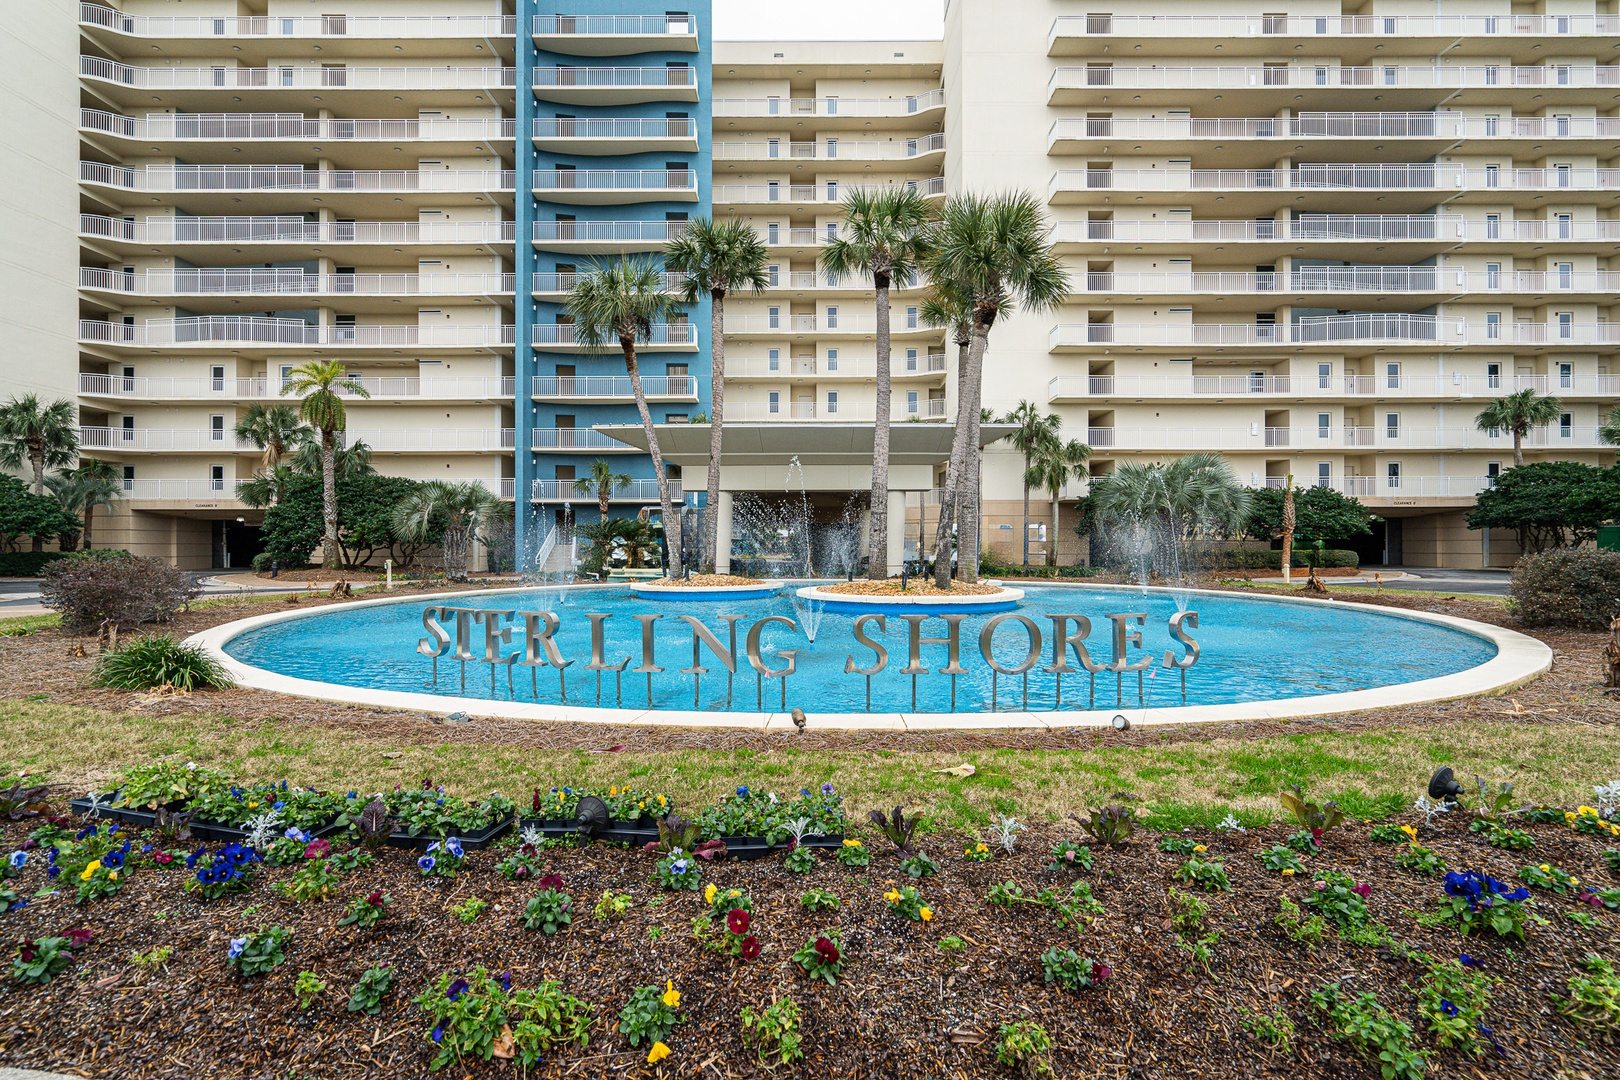 Enjoy your stay at the fabulous community of Sterling Shores!